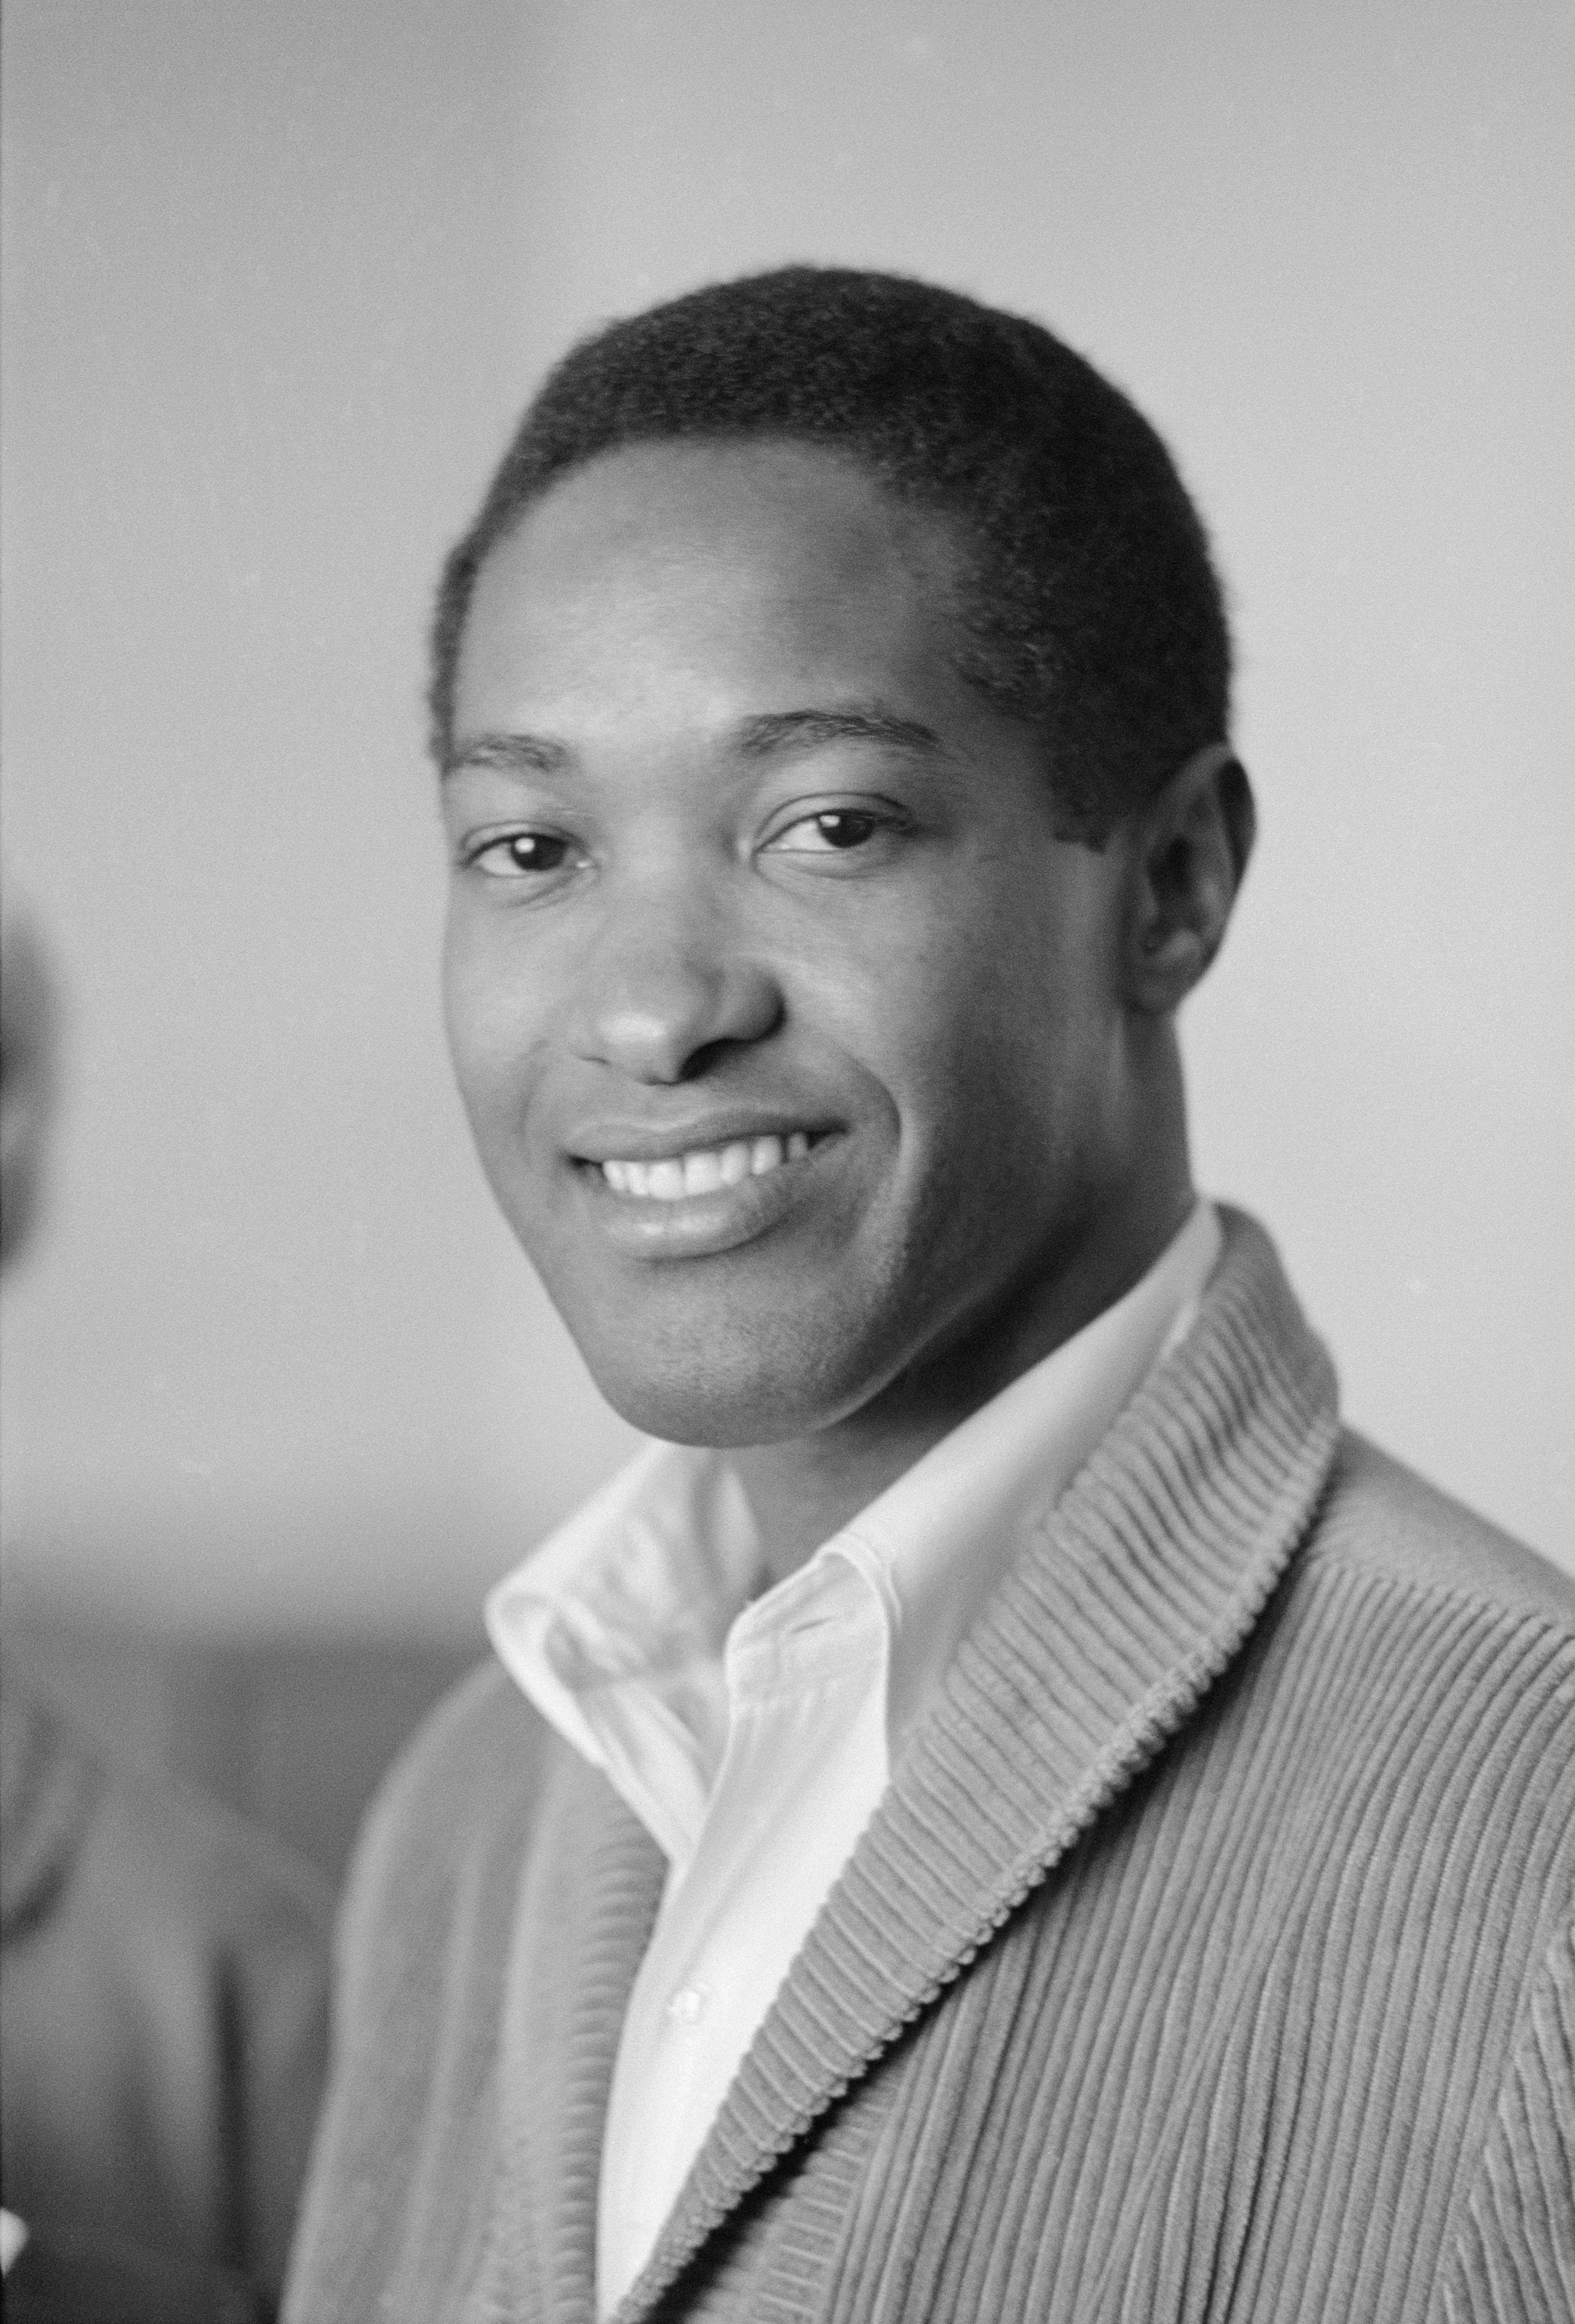 Sam Cooke photographed in California, Los Angeles, circa. 1958. | Photo: Getty Images